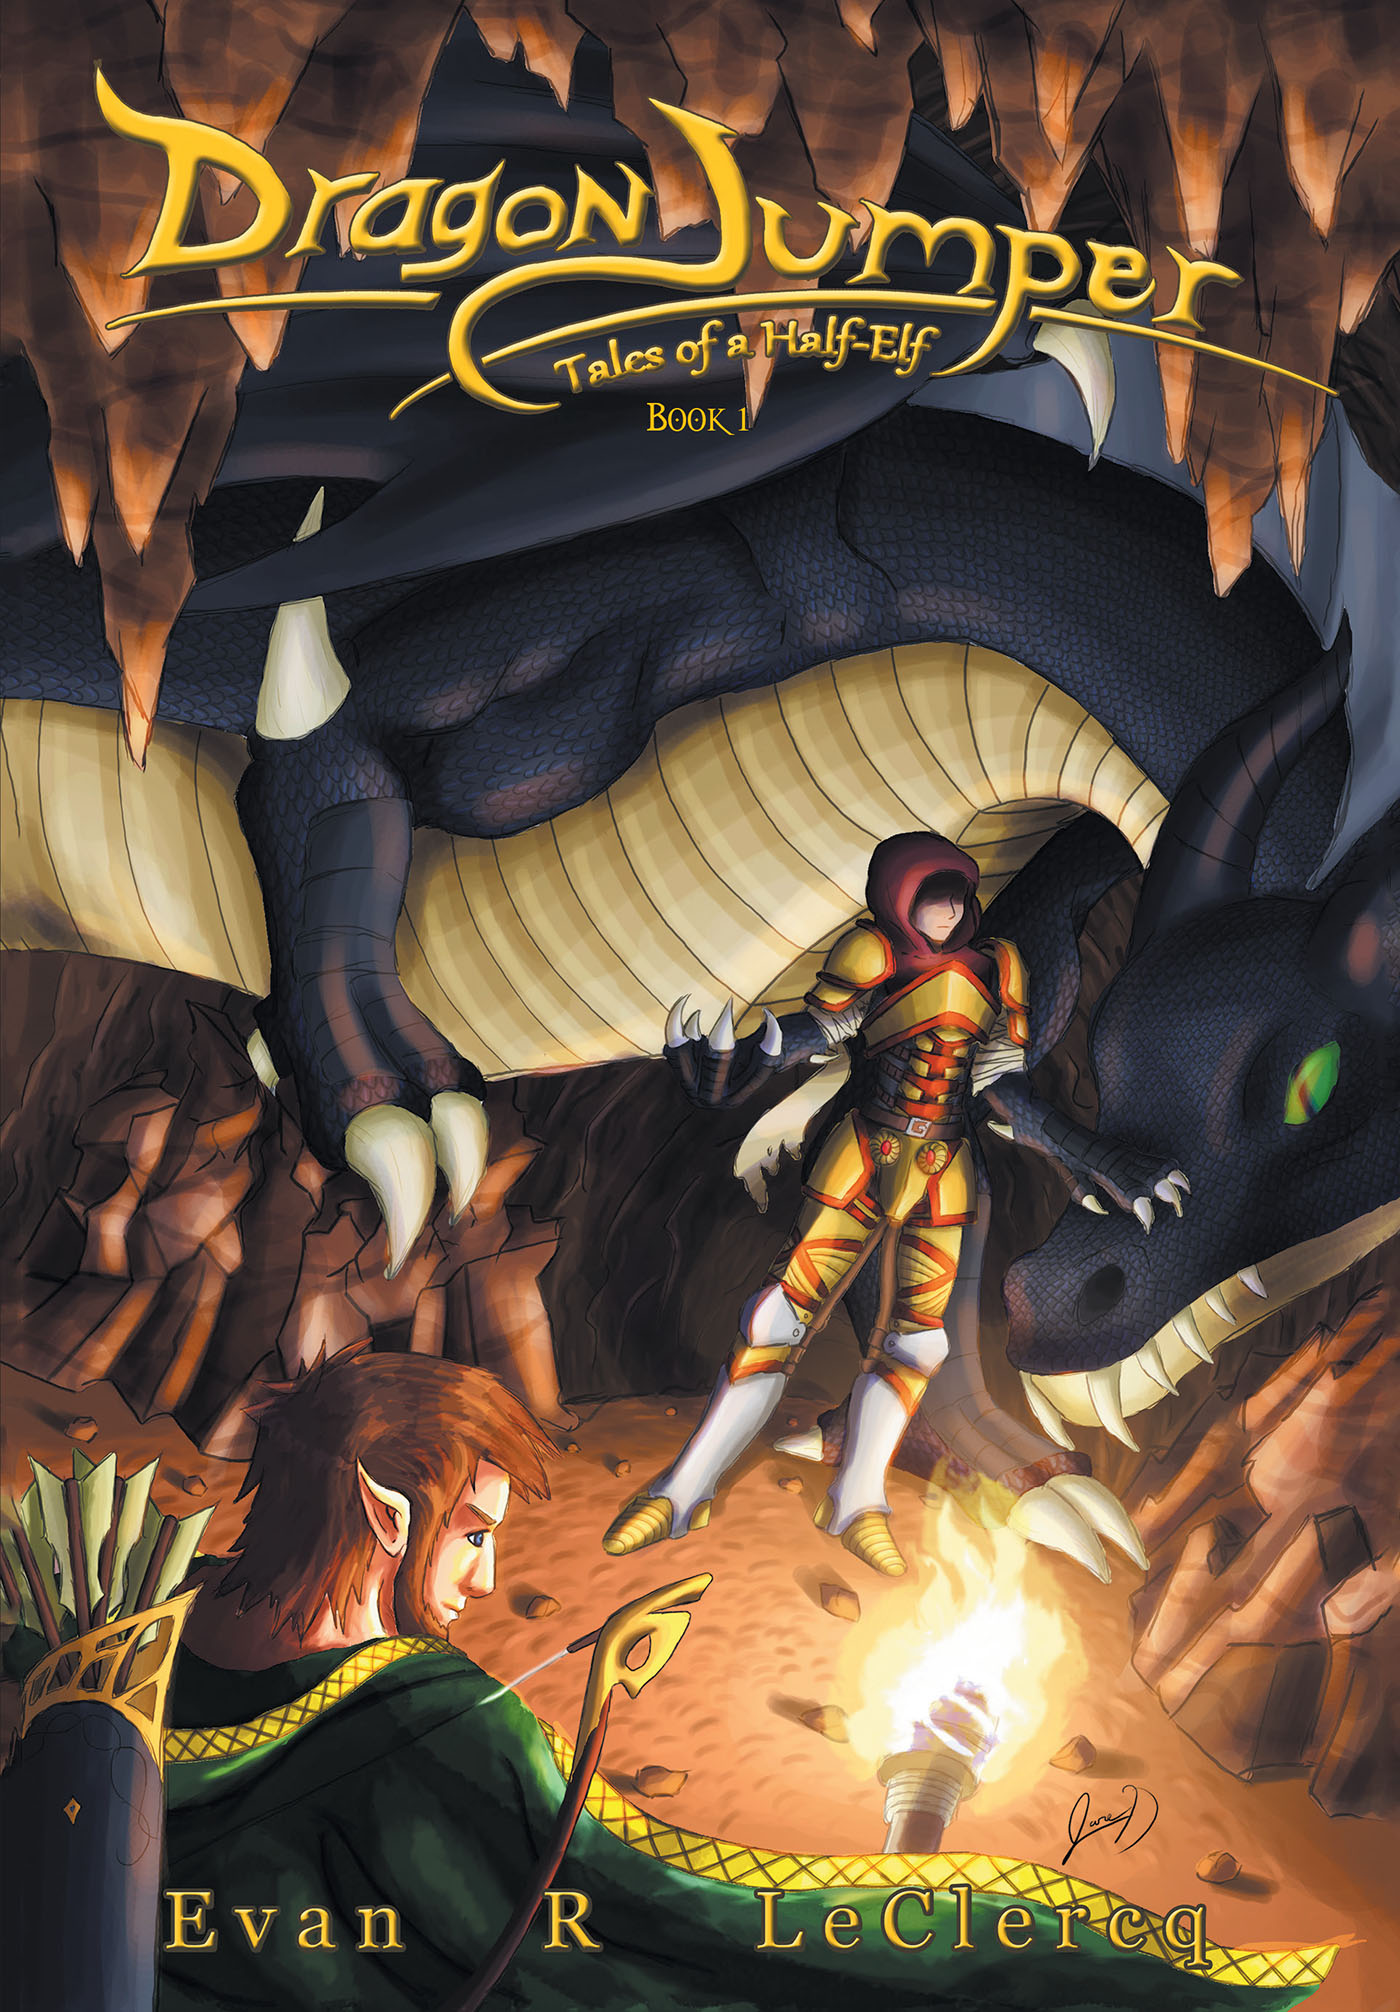 Author Evan R. LeClercq’s New Book, "Dragon Jumper: Tales of a Half-Elf: Book 1," is a Spellbinding Fantasy Novel That Takes Readers Along for an Unforgettable Adventure